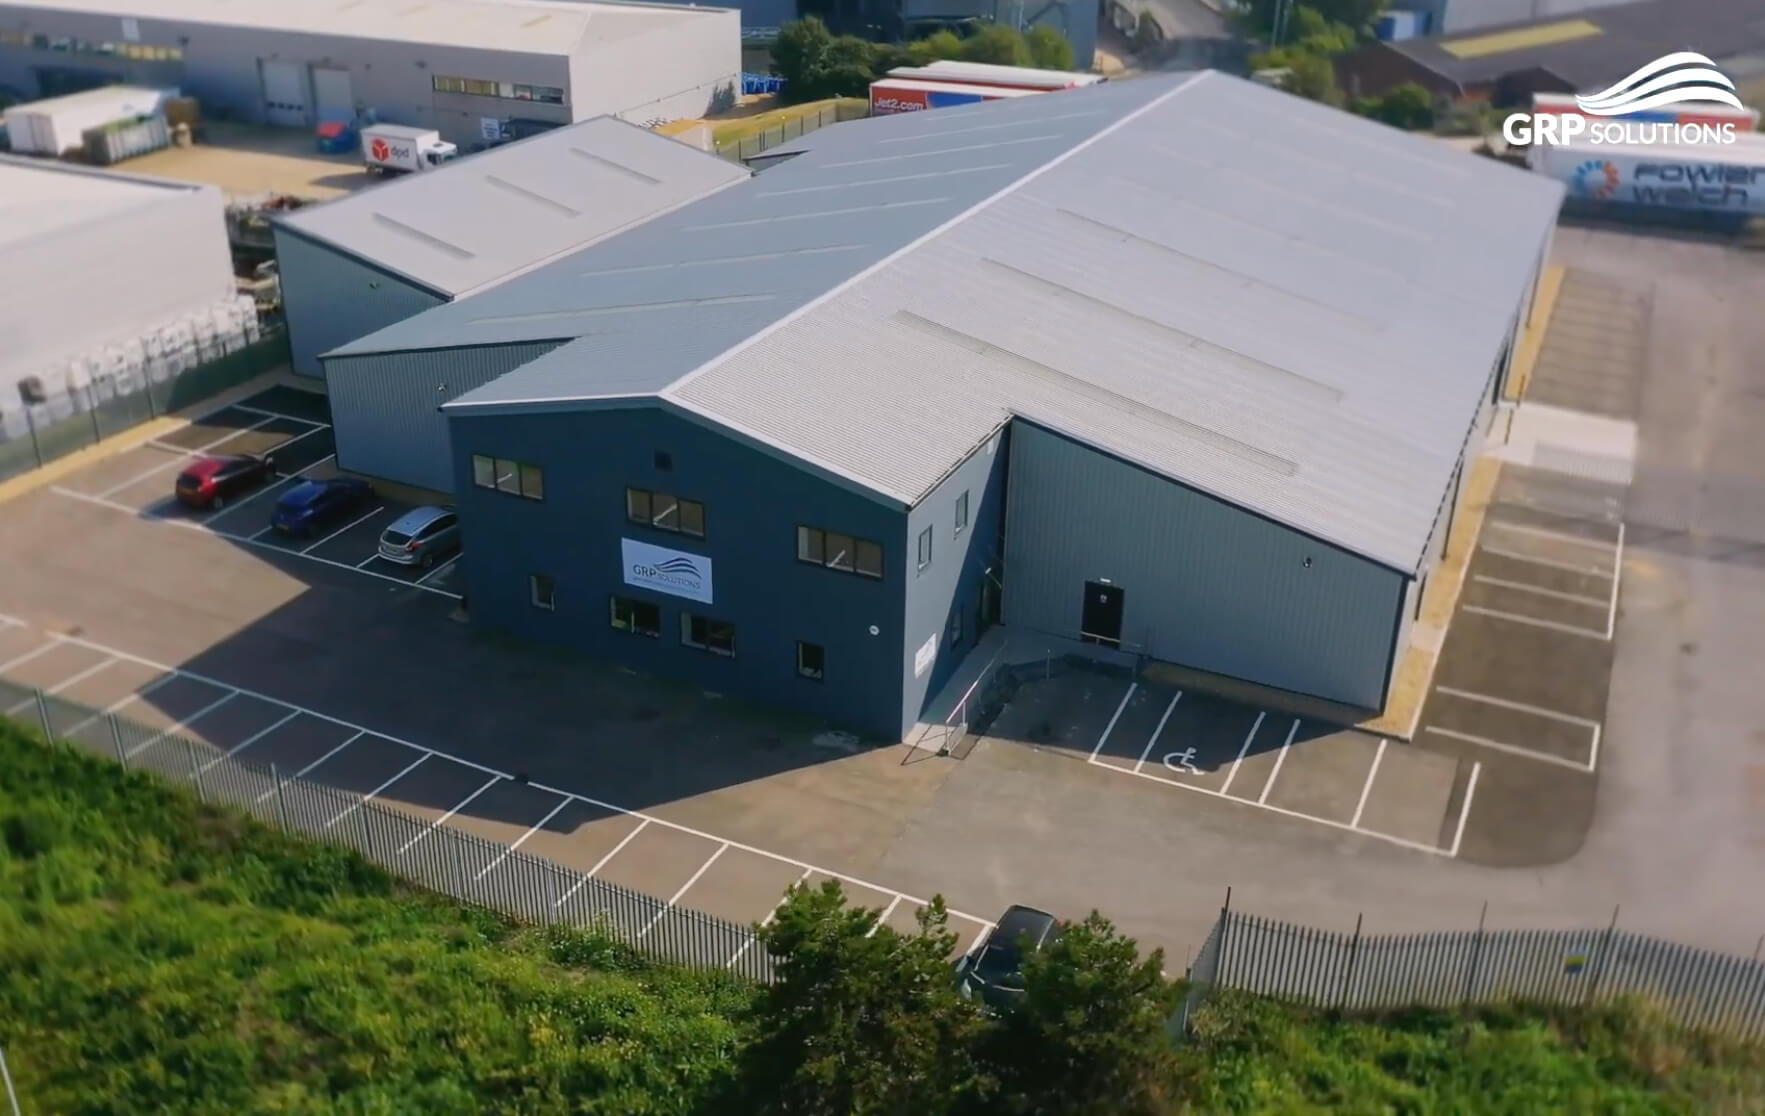 Image featuring the GRP Solutions HQ, based in Portsmouth.